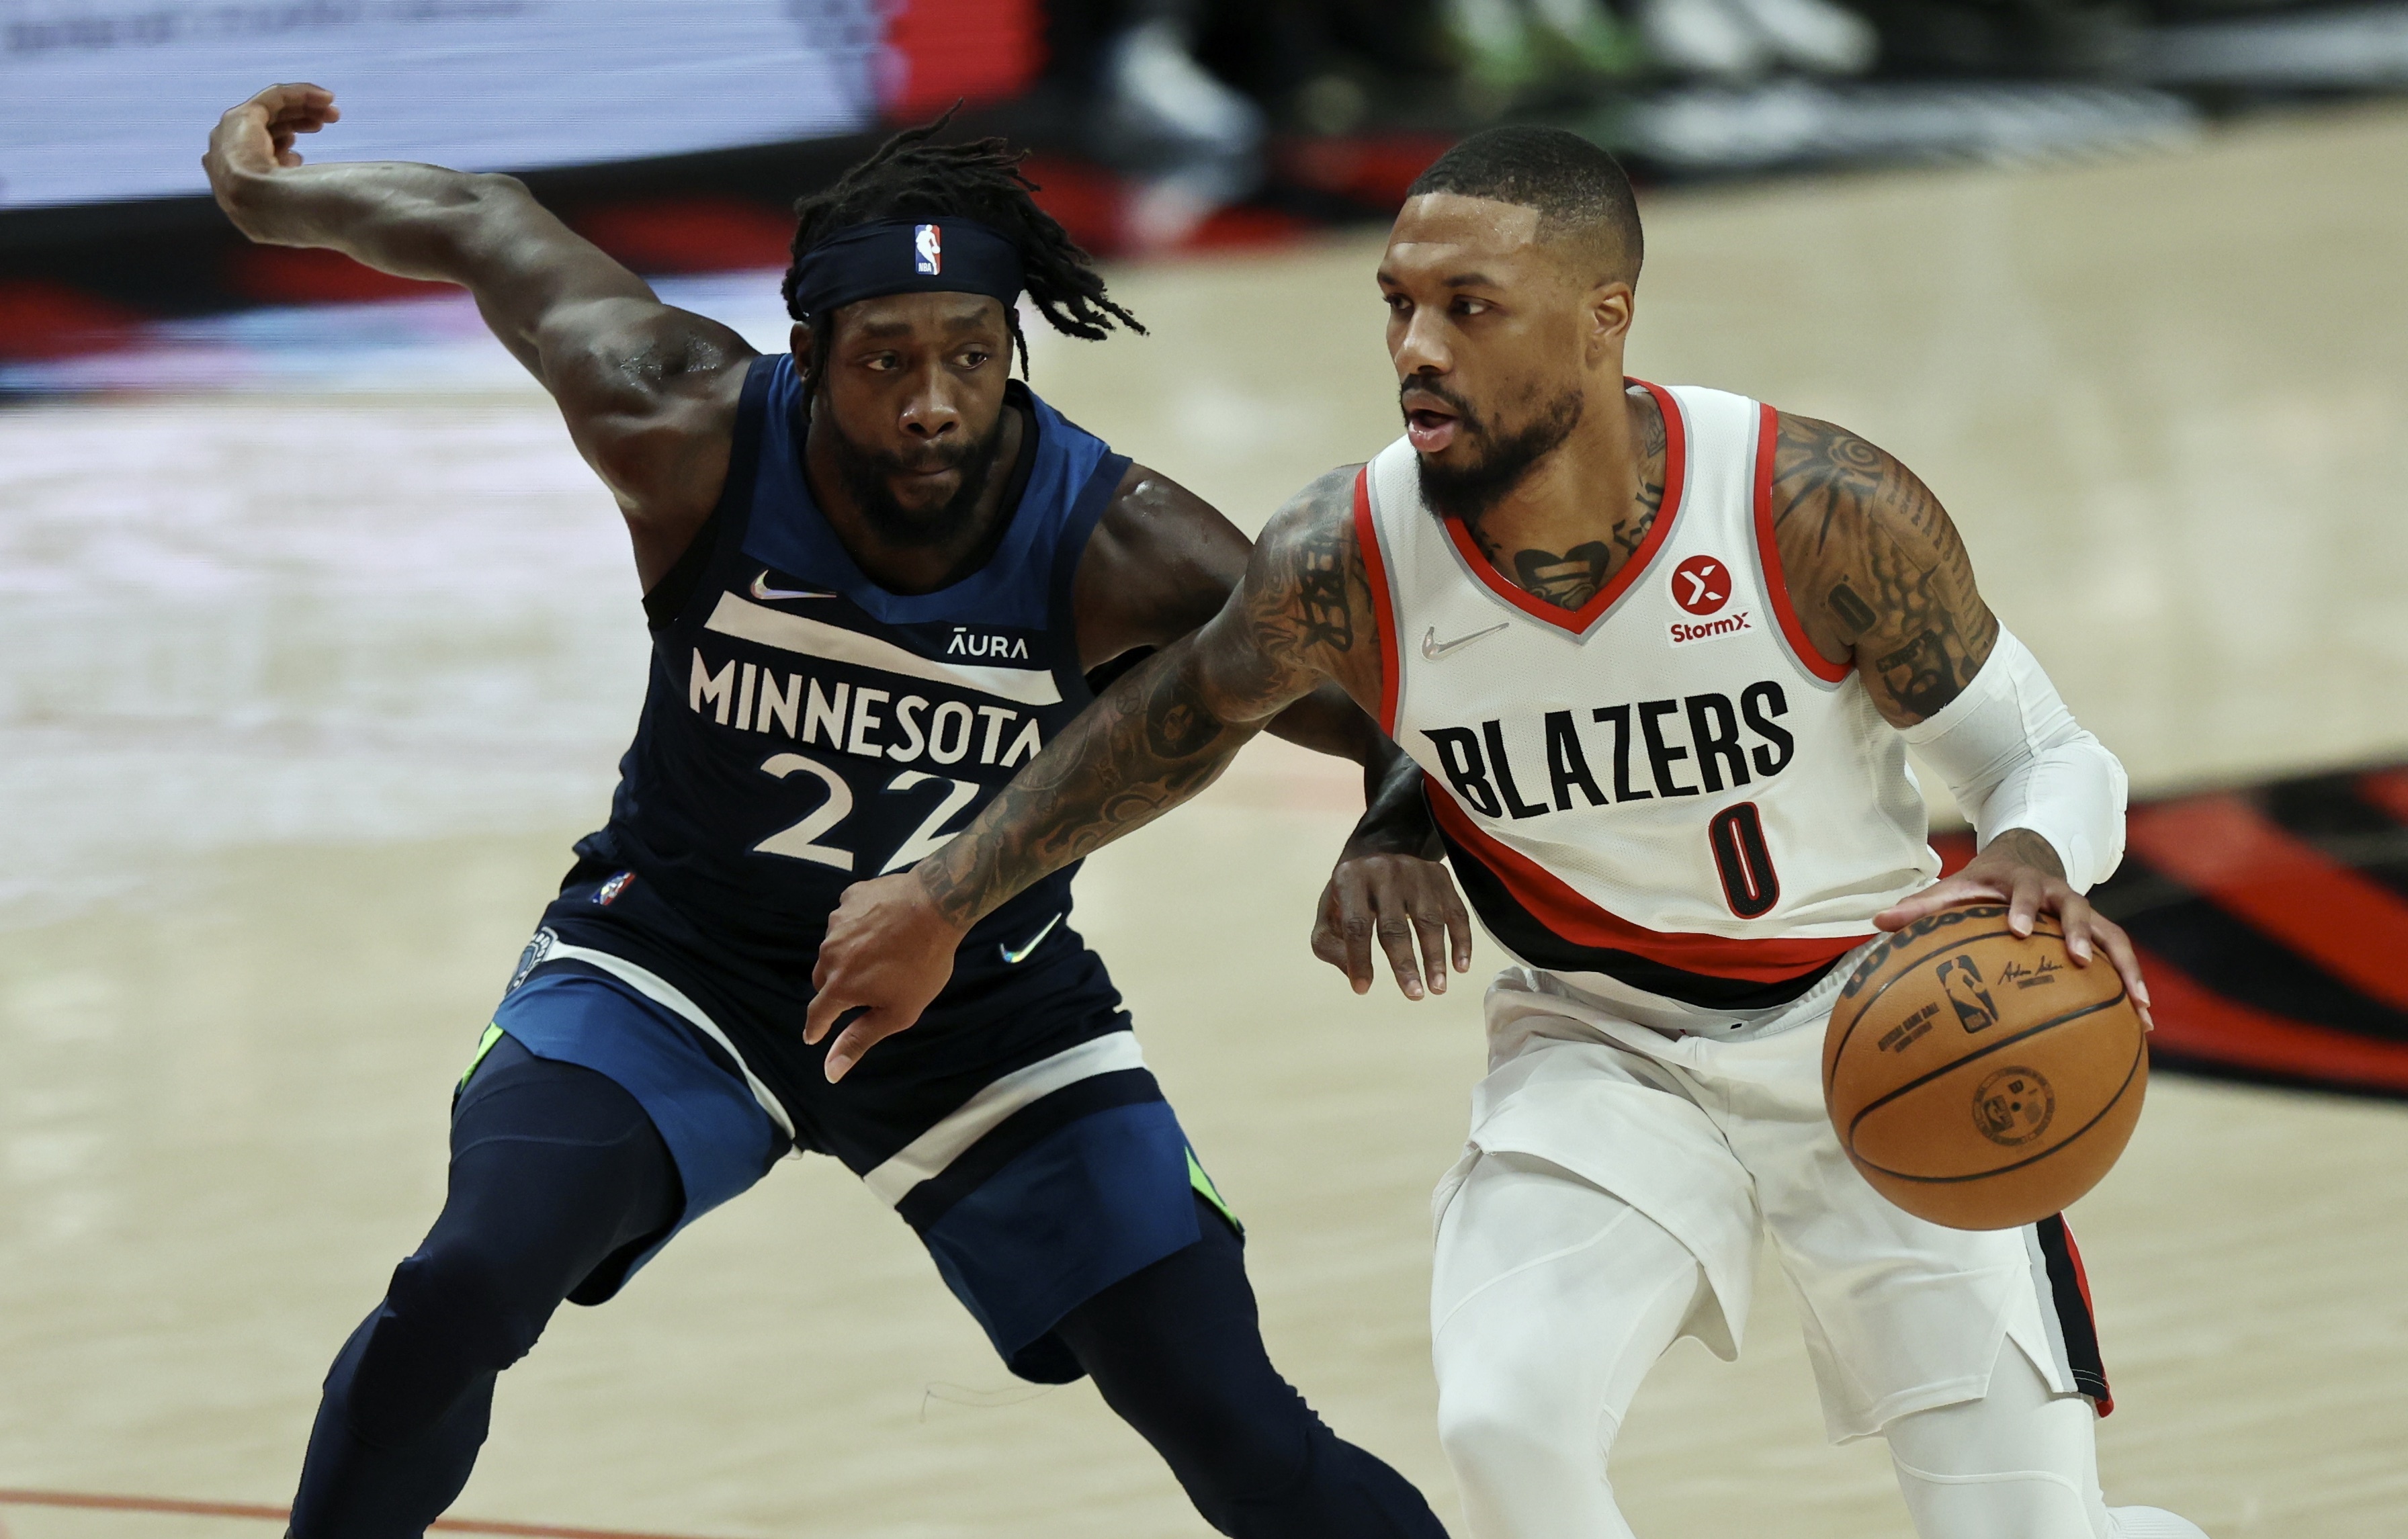 Portland Trail Blazers at New Orleans Pelicans Game preview, time, TV channel, how to watch free live stream online